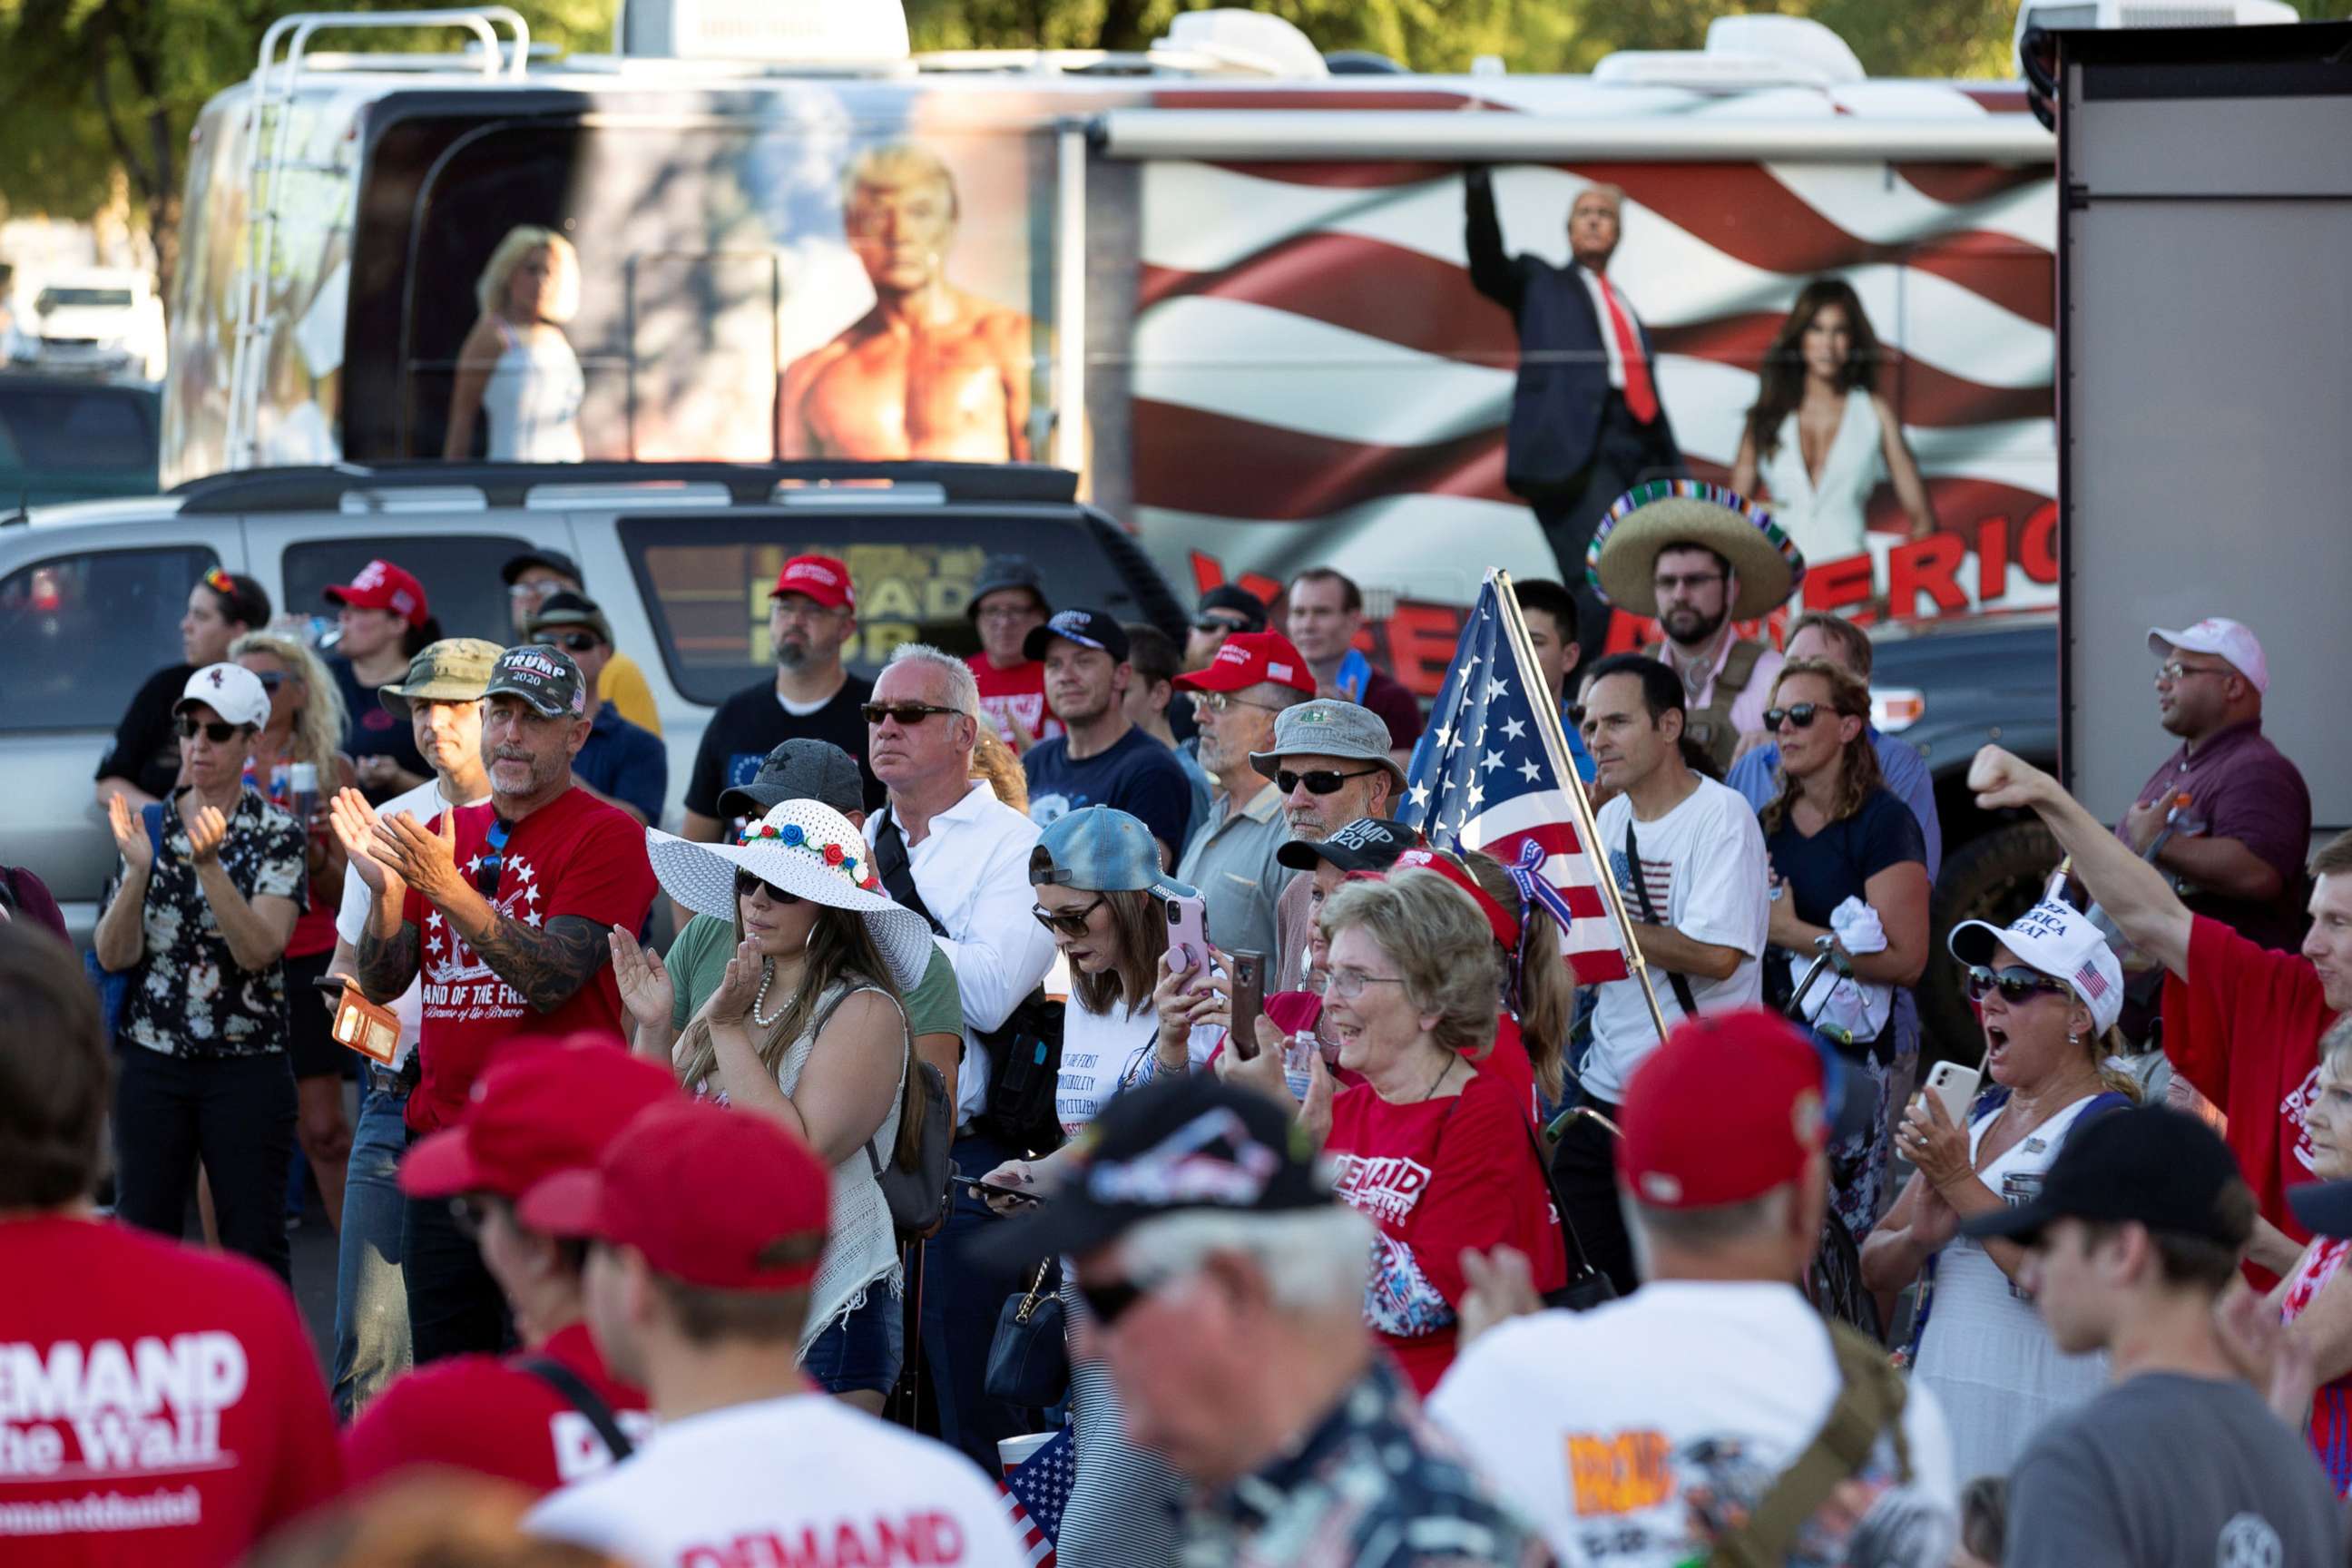 PHOTO: People listen to the speaker at a rally against restrictions to prevent the spread of coronavirus in Phoenix, July 4, 2020.